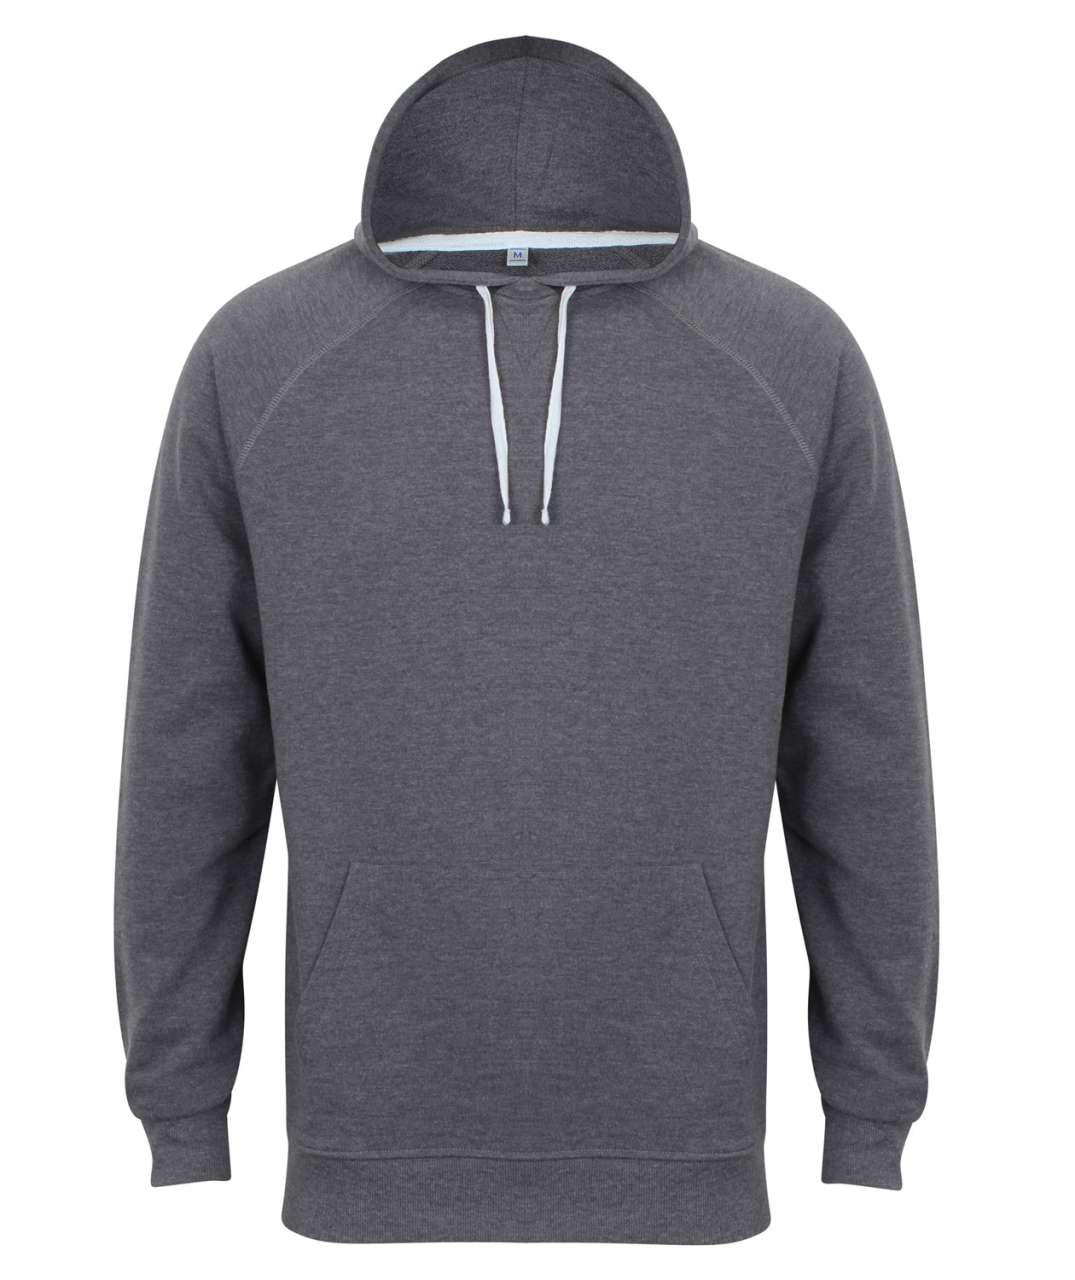 Promo  MEN'S FRENCH TERRY HOODIE